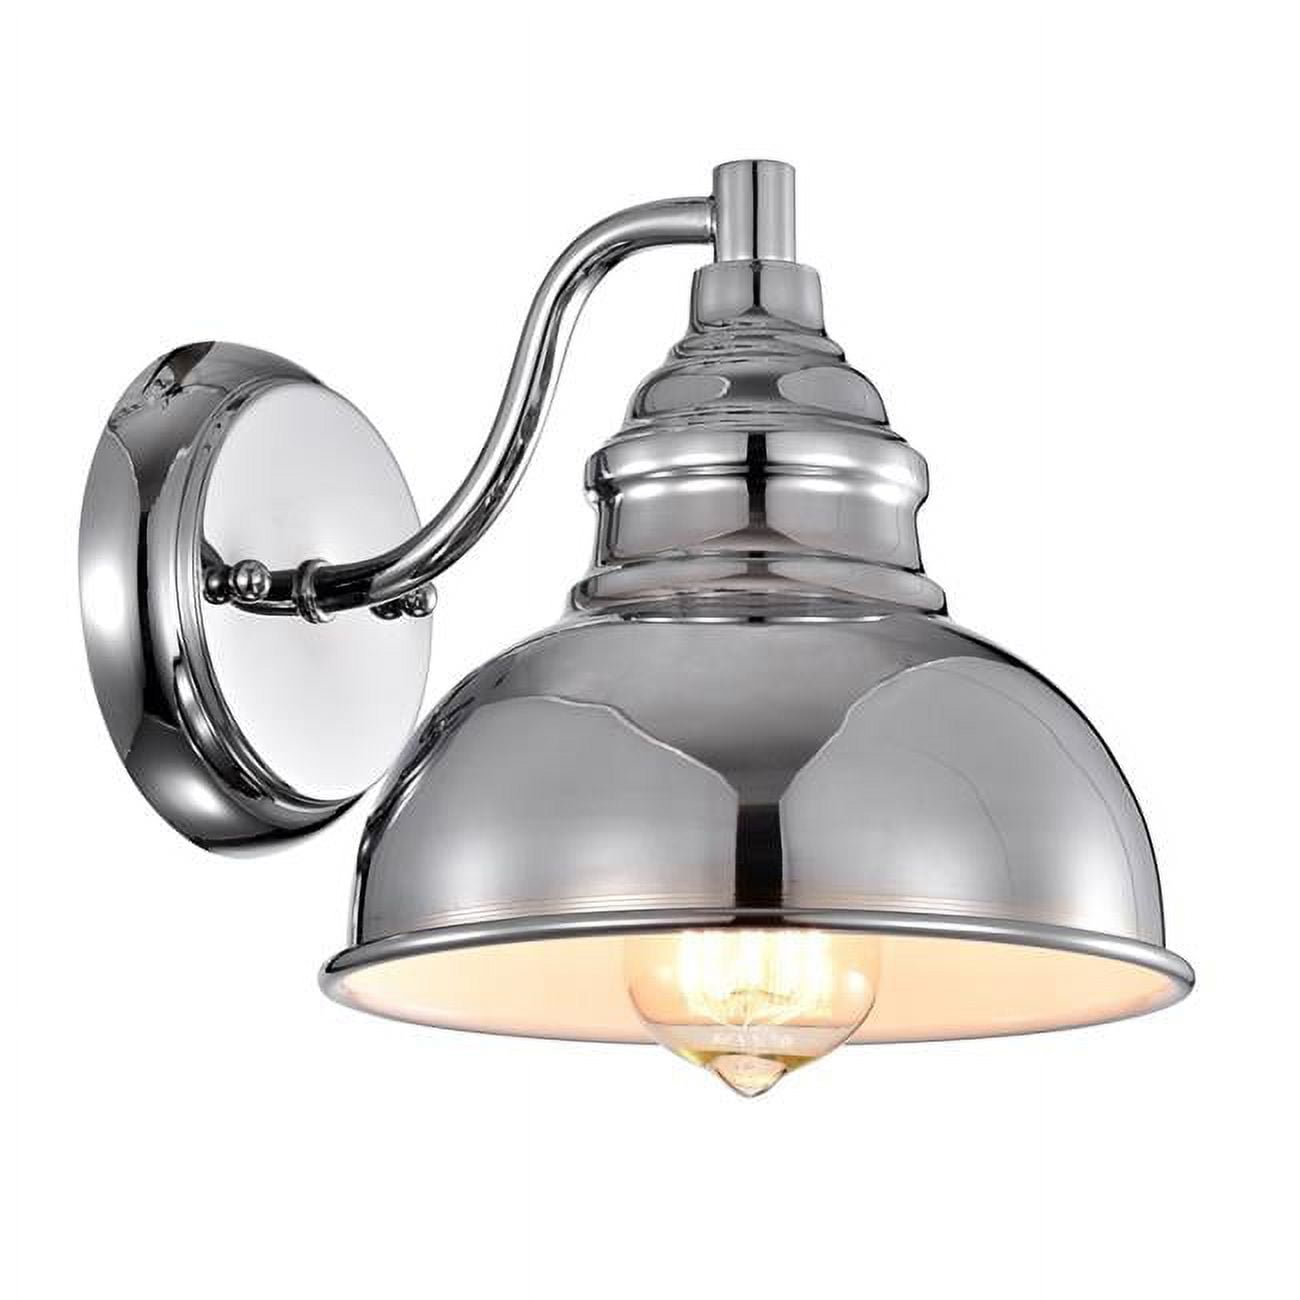 Picture of Chloe Lighting CH2D095CM08-WS1 8 in. Ironclad Industrial 1 Light Indoor Wall Sconce, Chrome